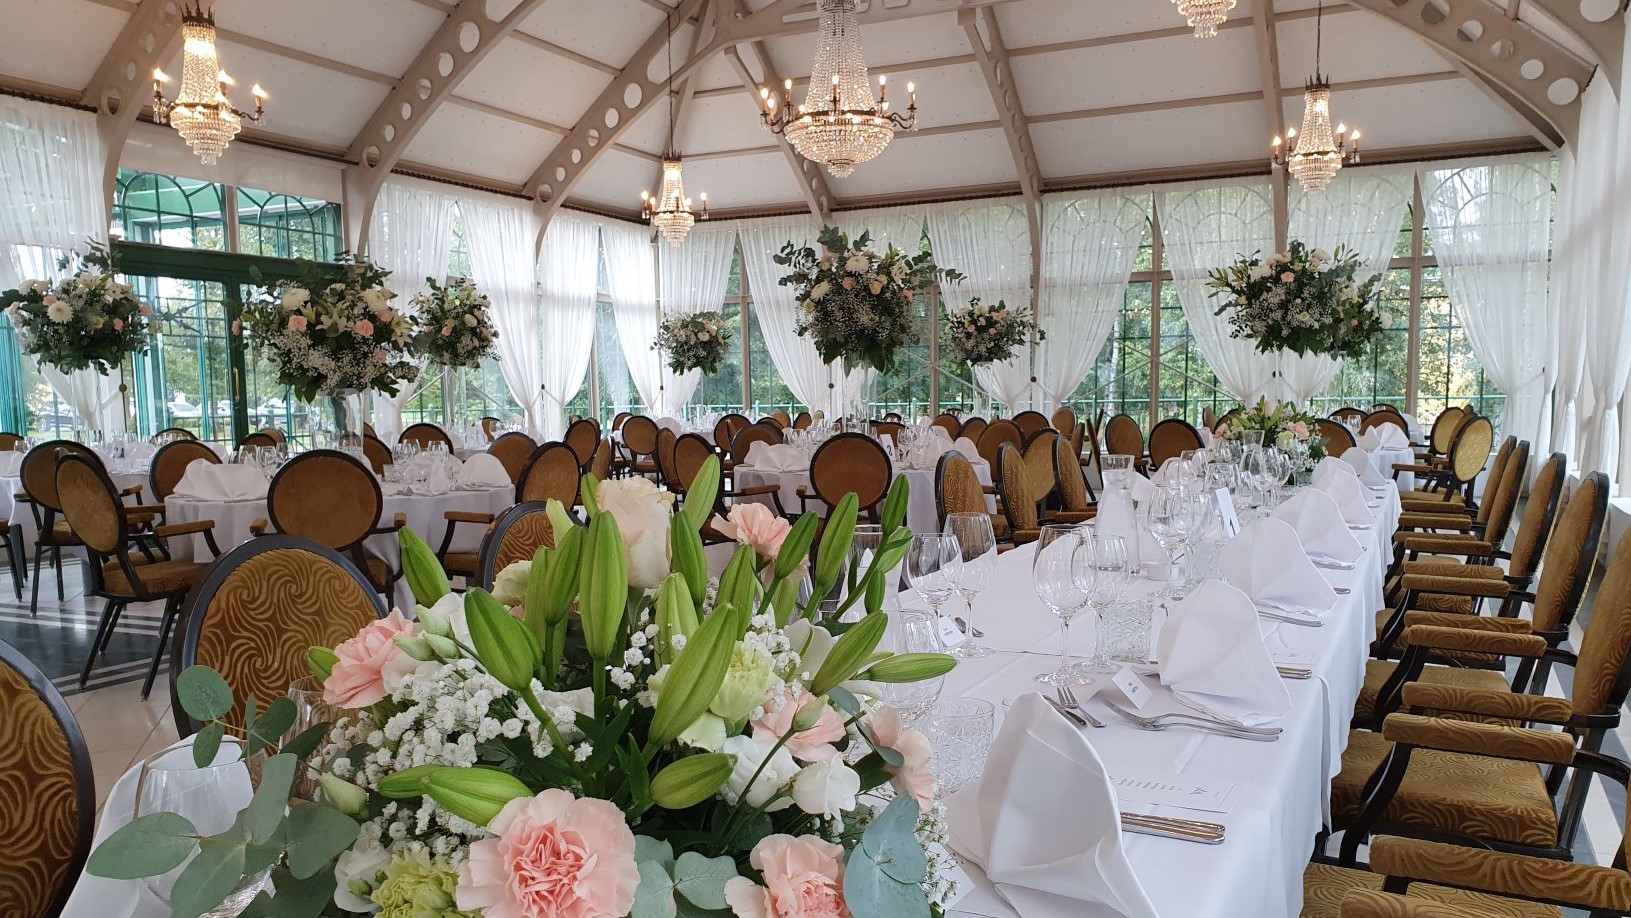 Picture perfect weddings and private conferences